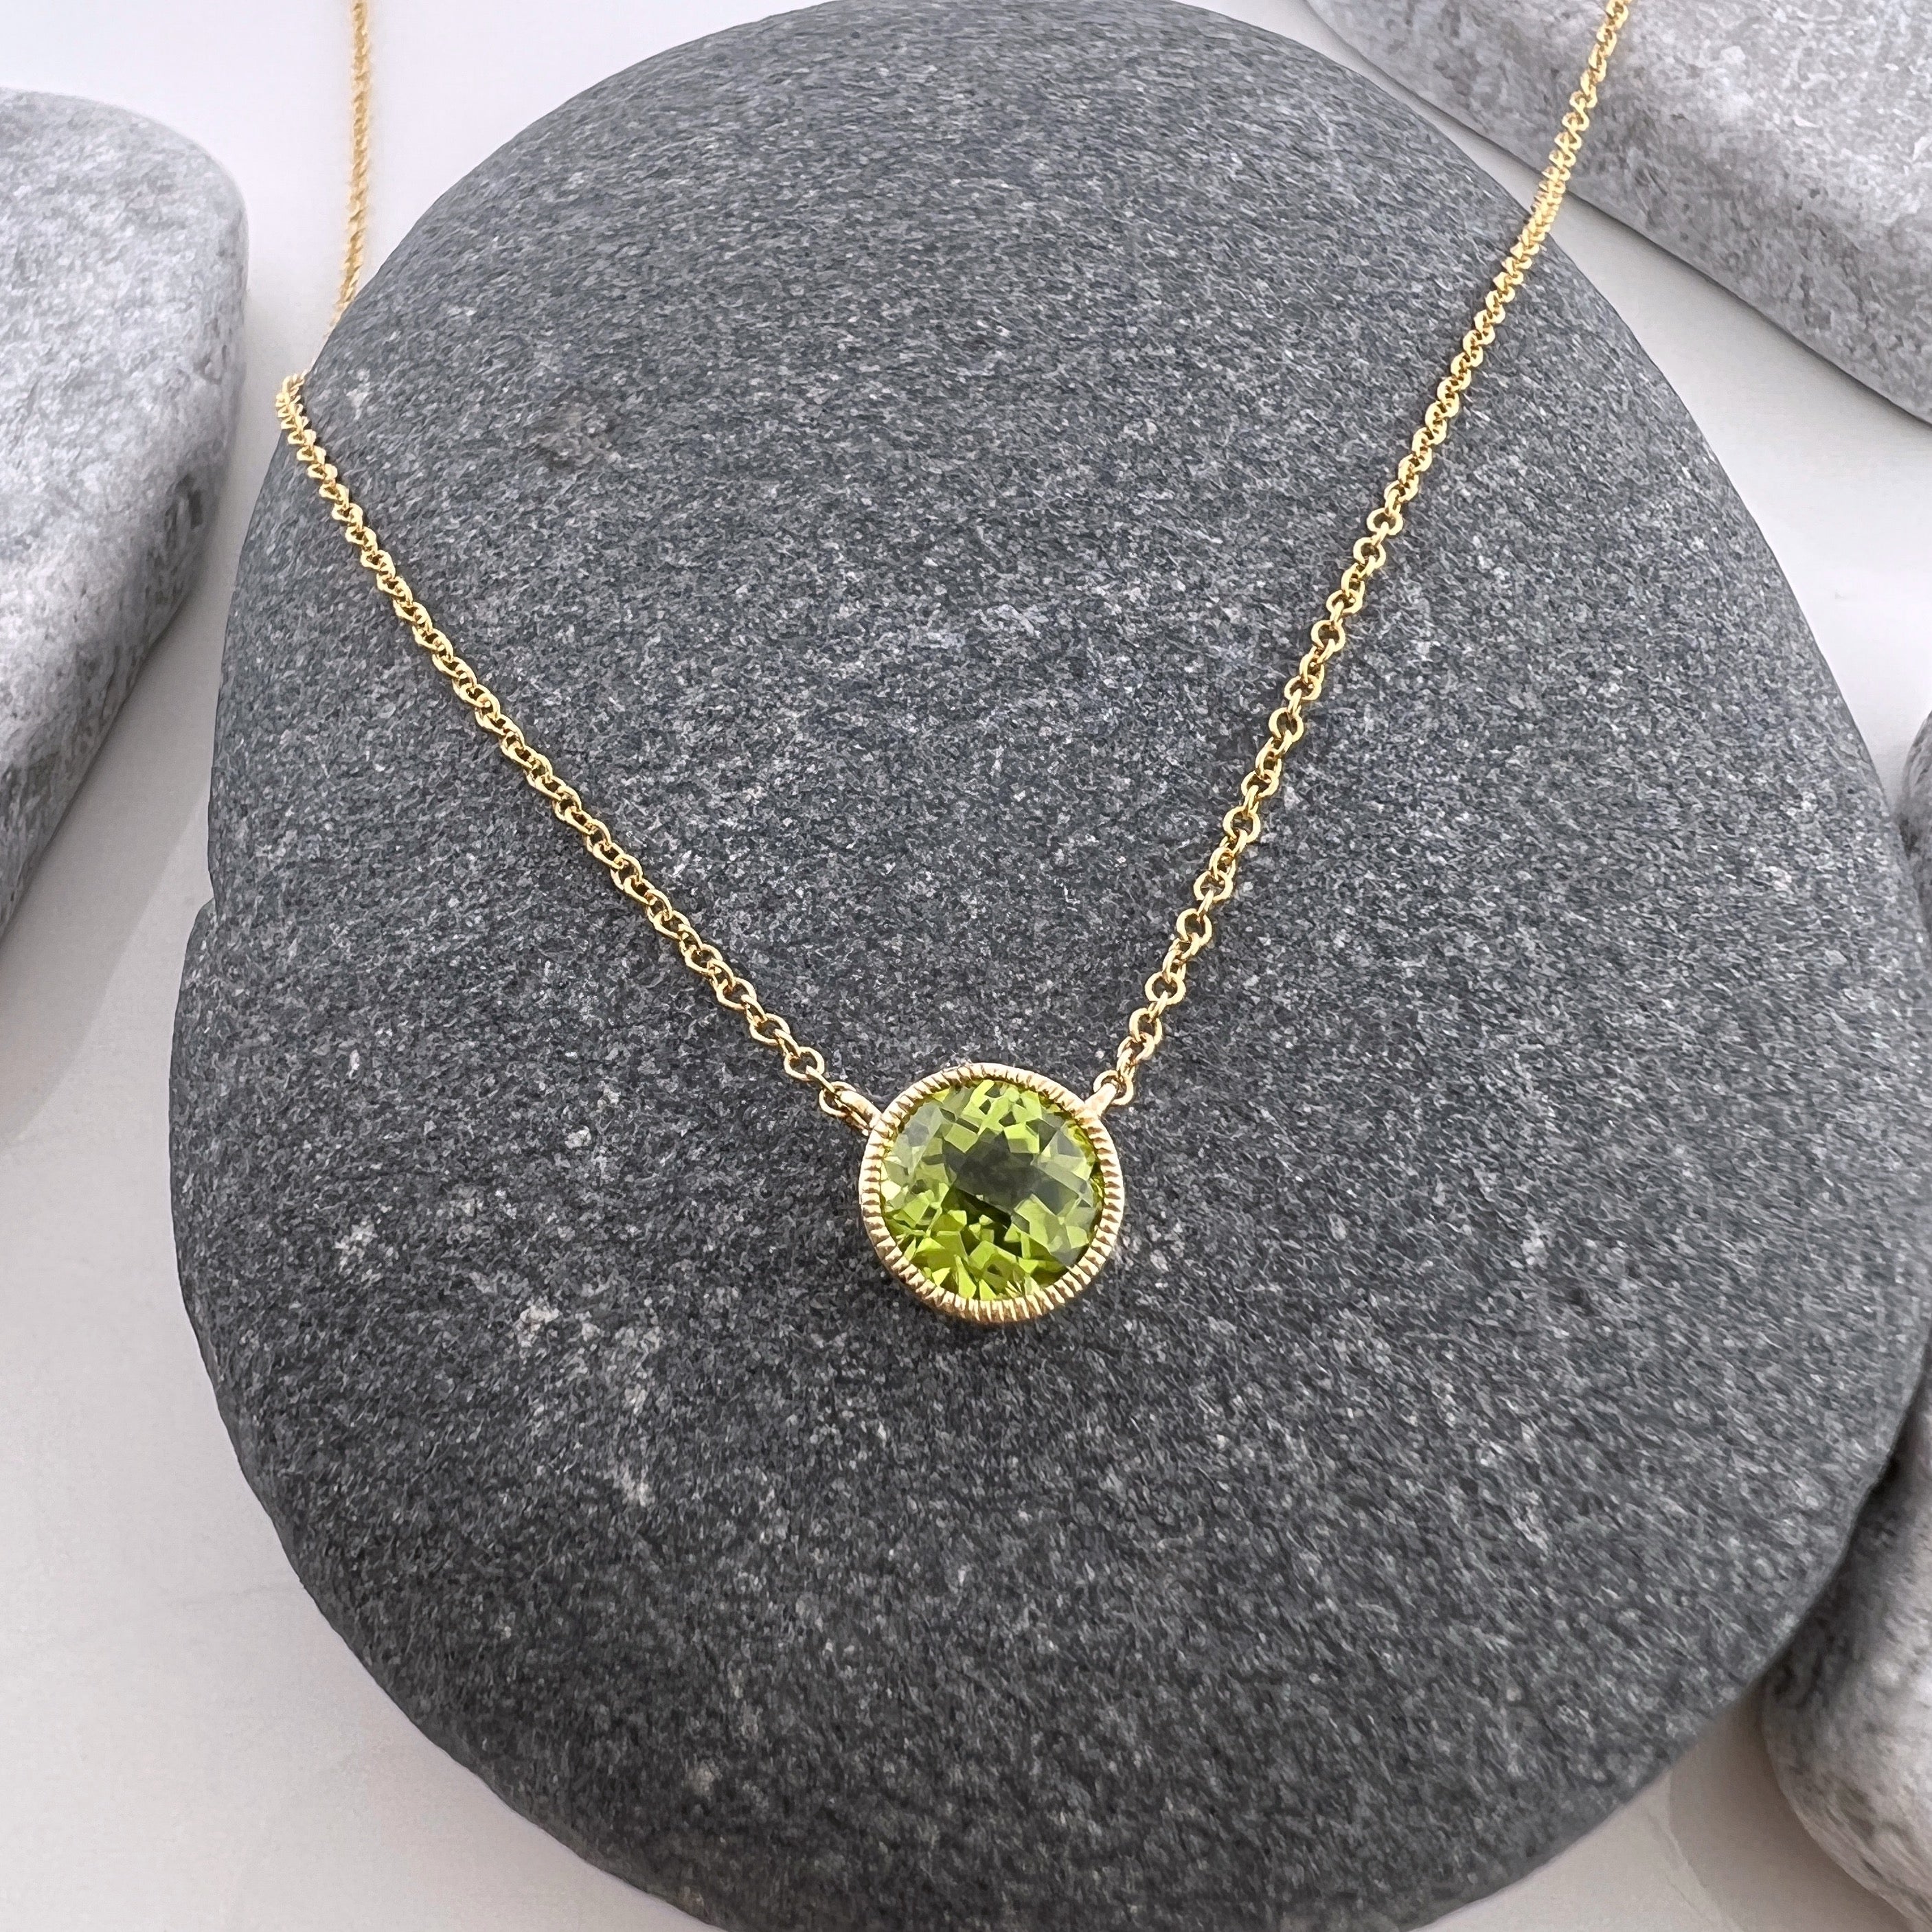 HAPPY JEWELLERY Peridot necklace, necklace for women, birthstone necklace,  gold or silver necklace, tiny necklace, custom